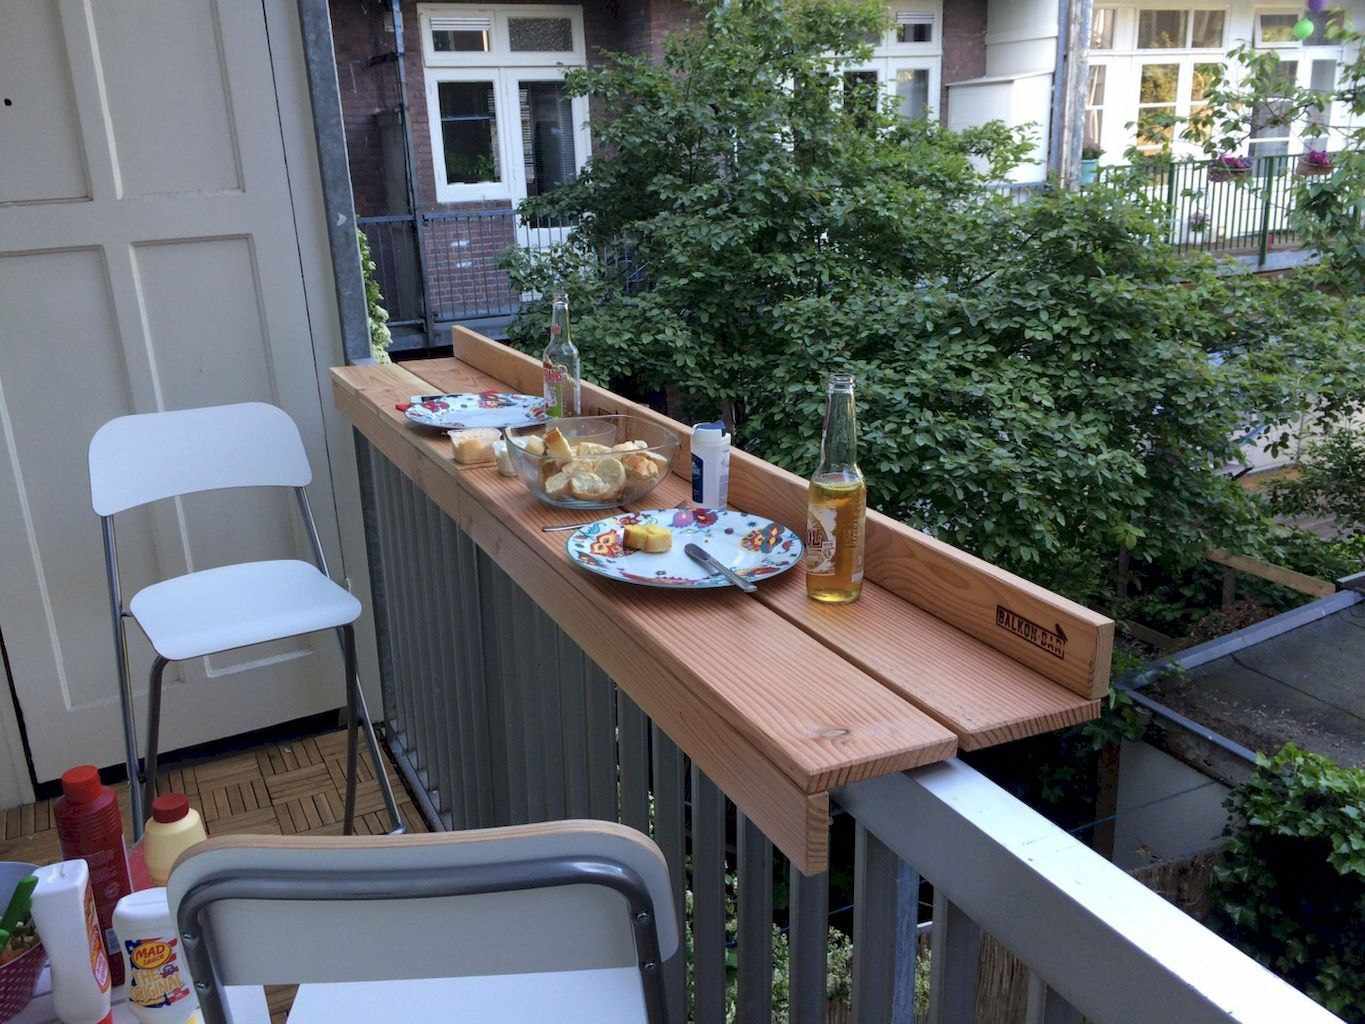 How to decorate small apartment balconies